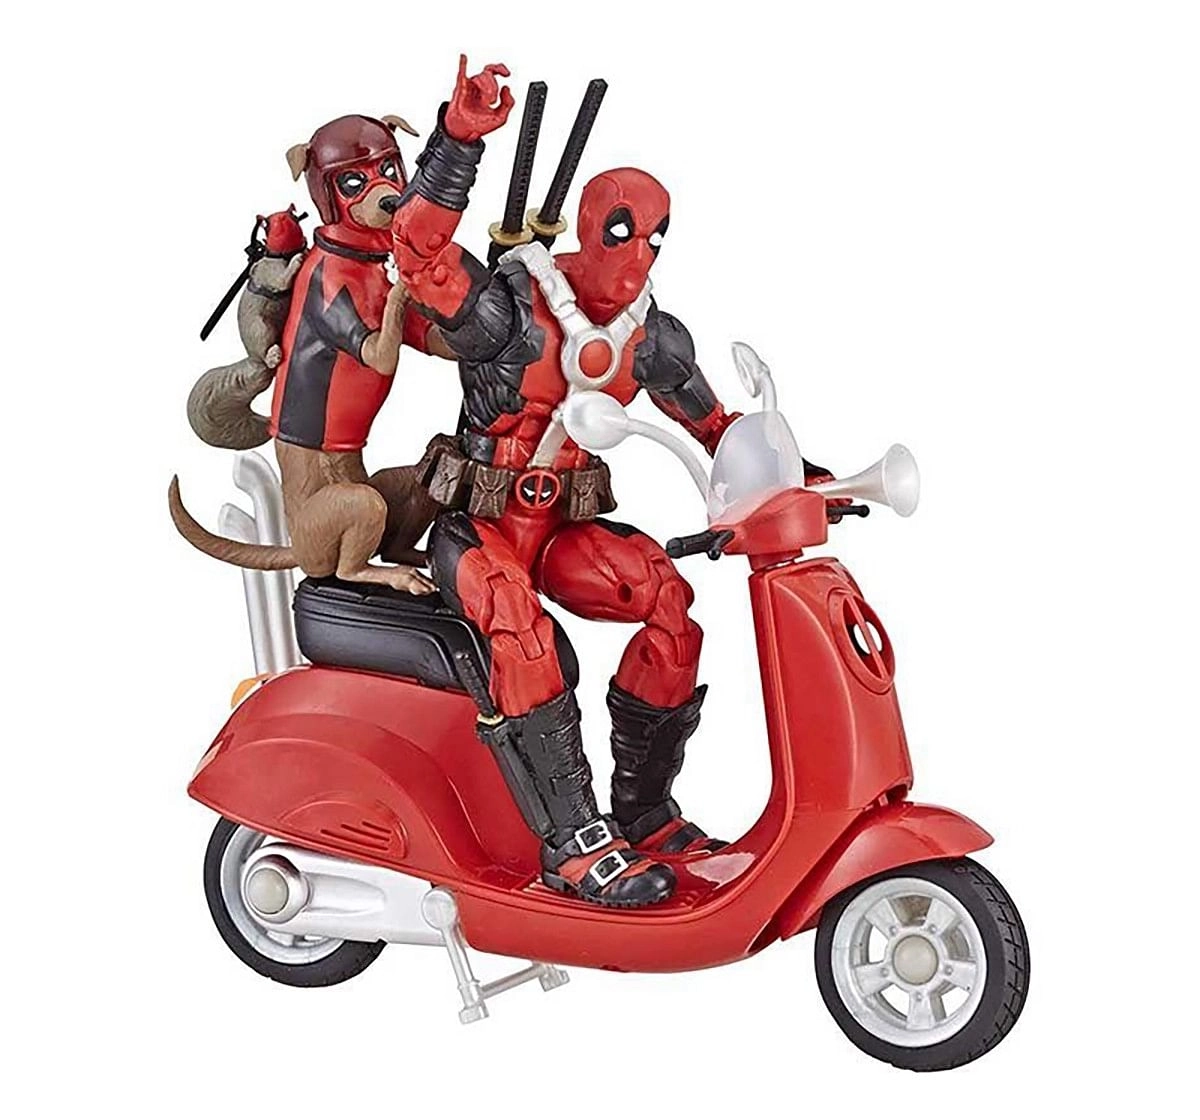 Marvel Legends 6-inch Action Figure with Vehicle Assorted Action Figure Play Sets for Kids age 4Y+ 